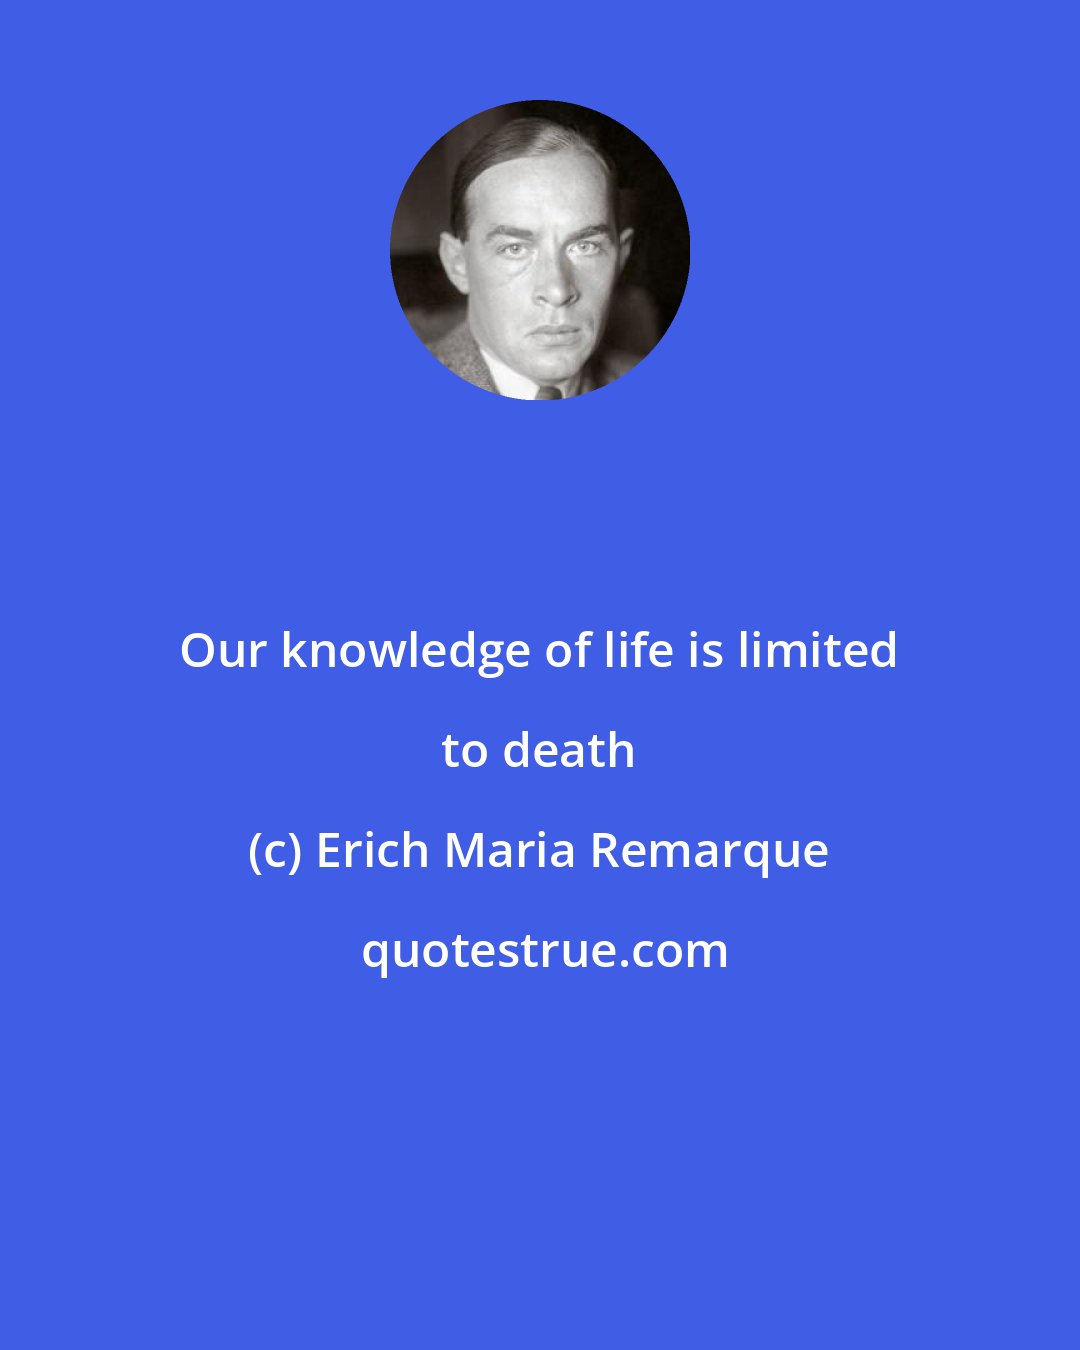 Erich Maria Remarque: Our knowledge of life is limited to death